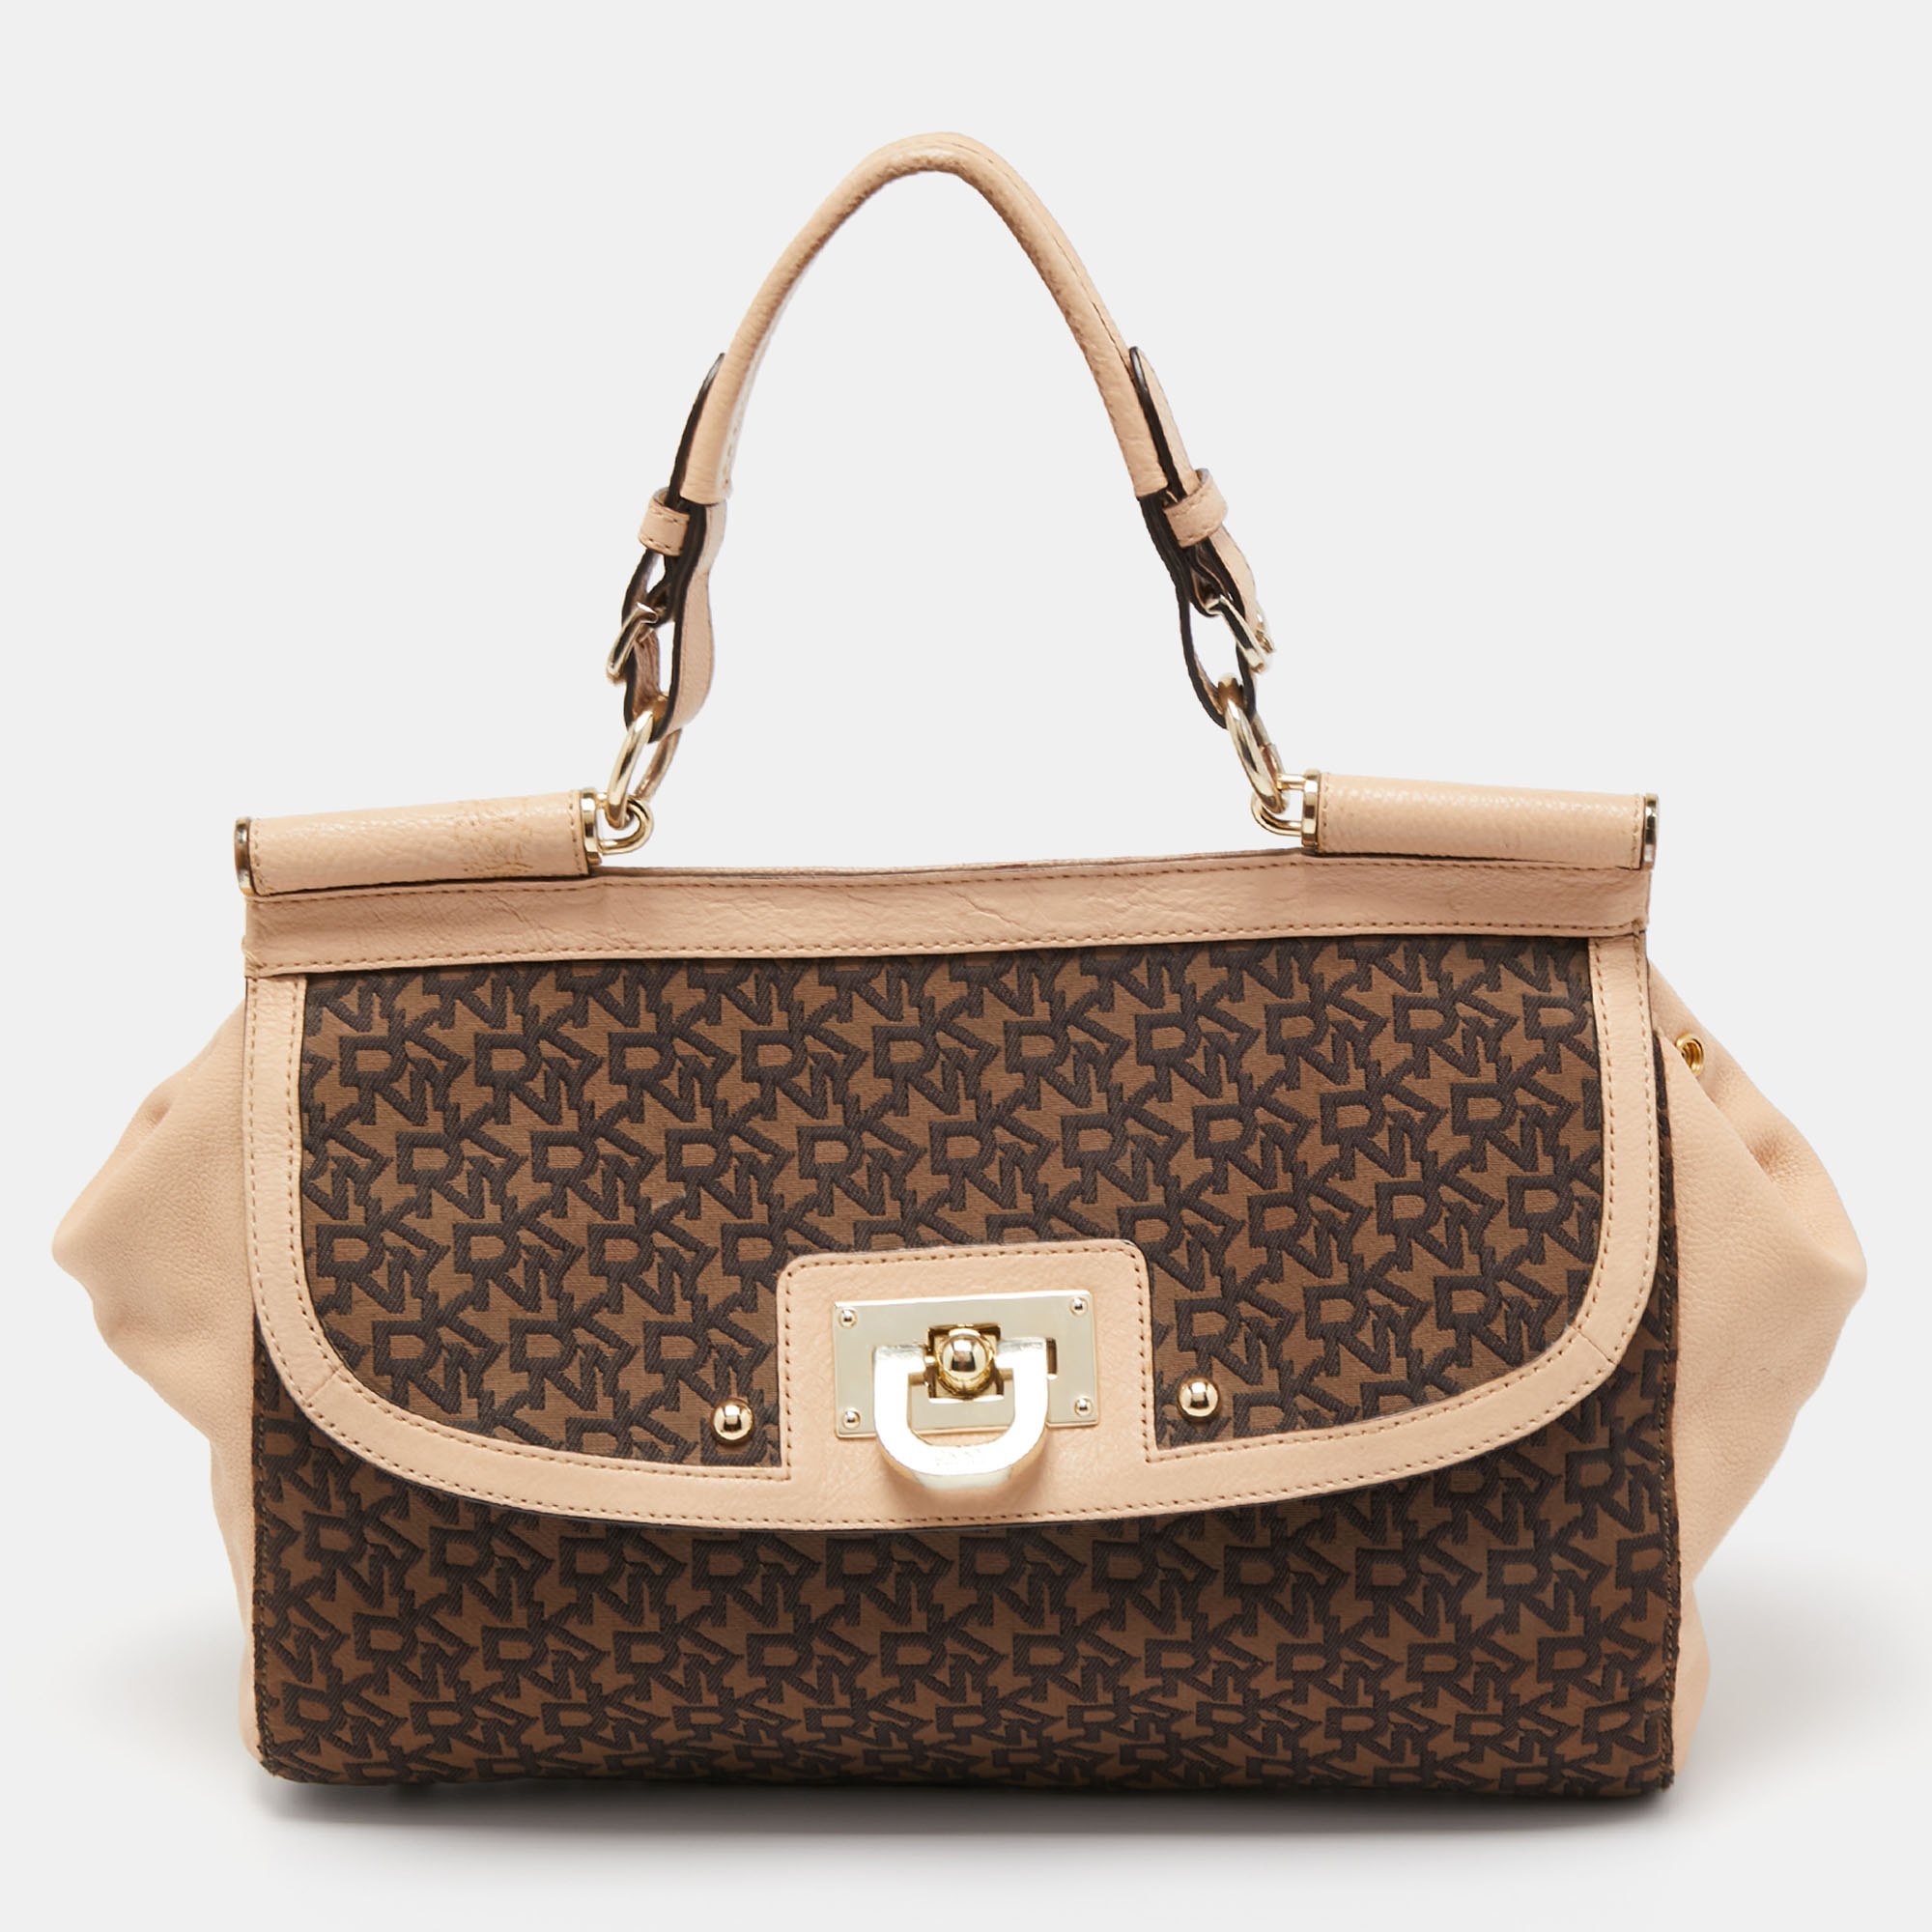 

Dkny Brown/Beige Signature Coated Canvas And Leather Satchel